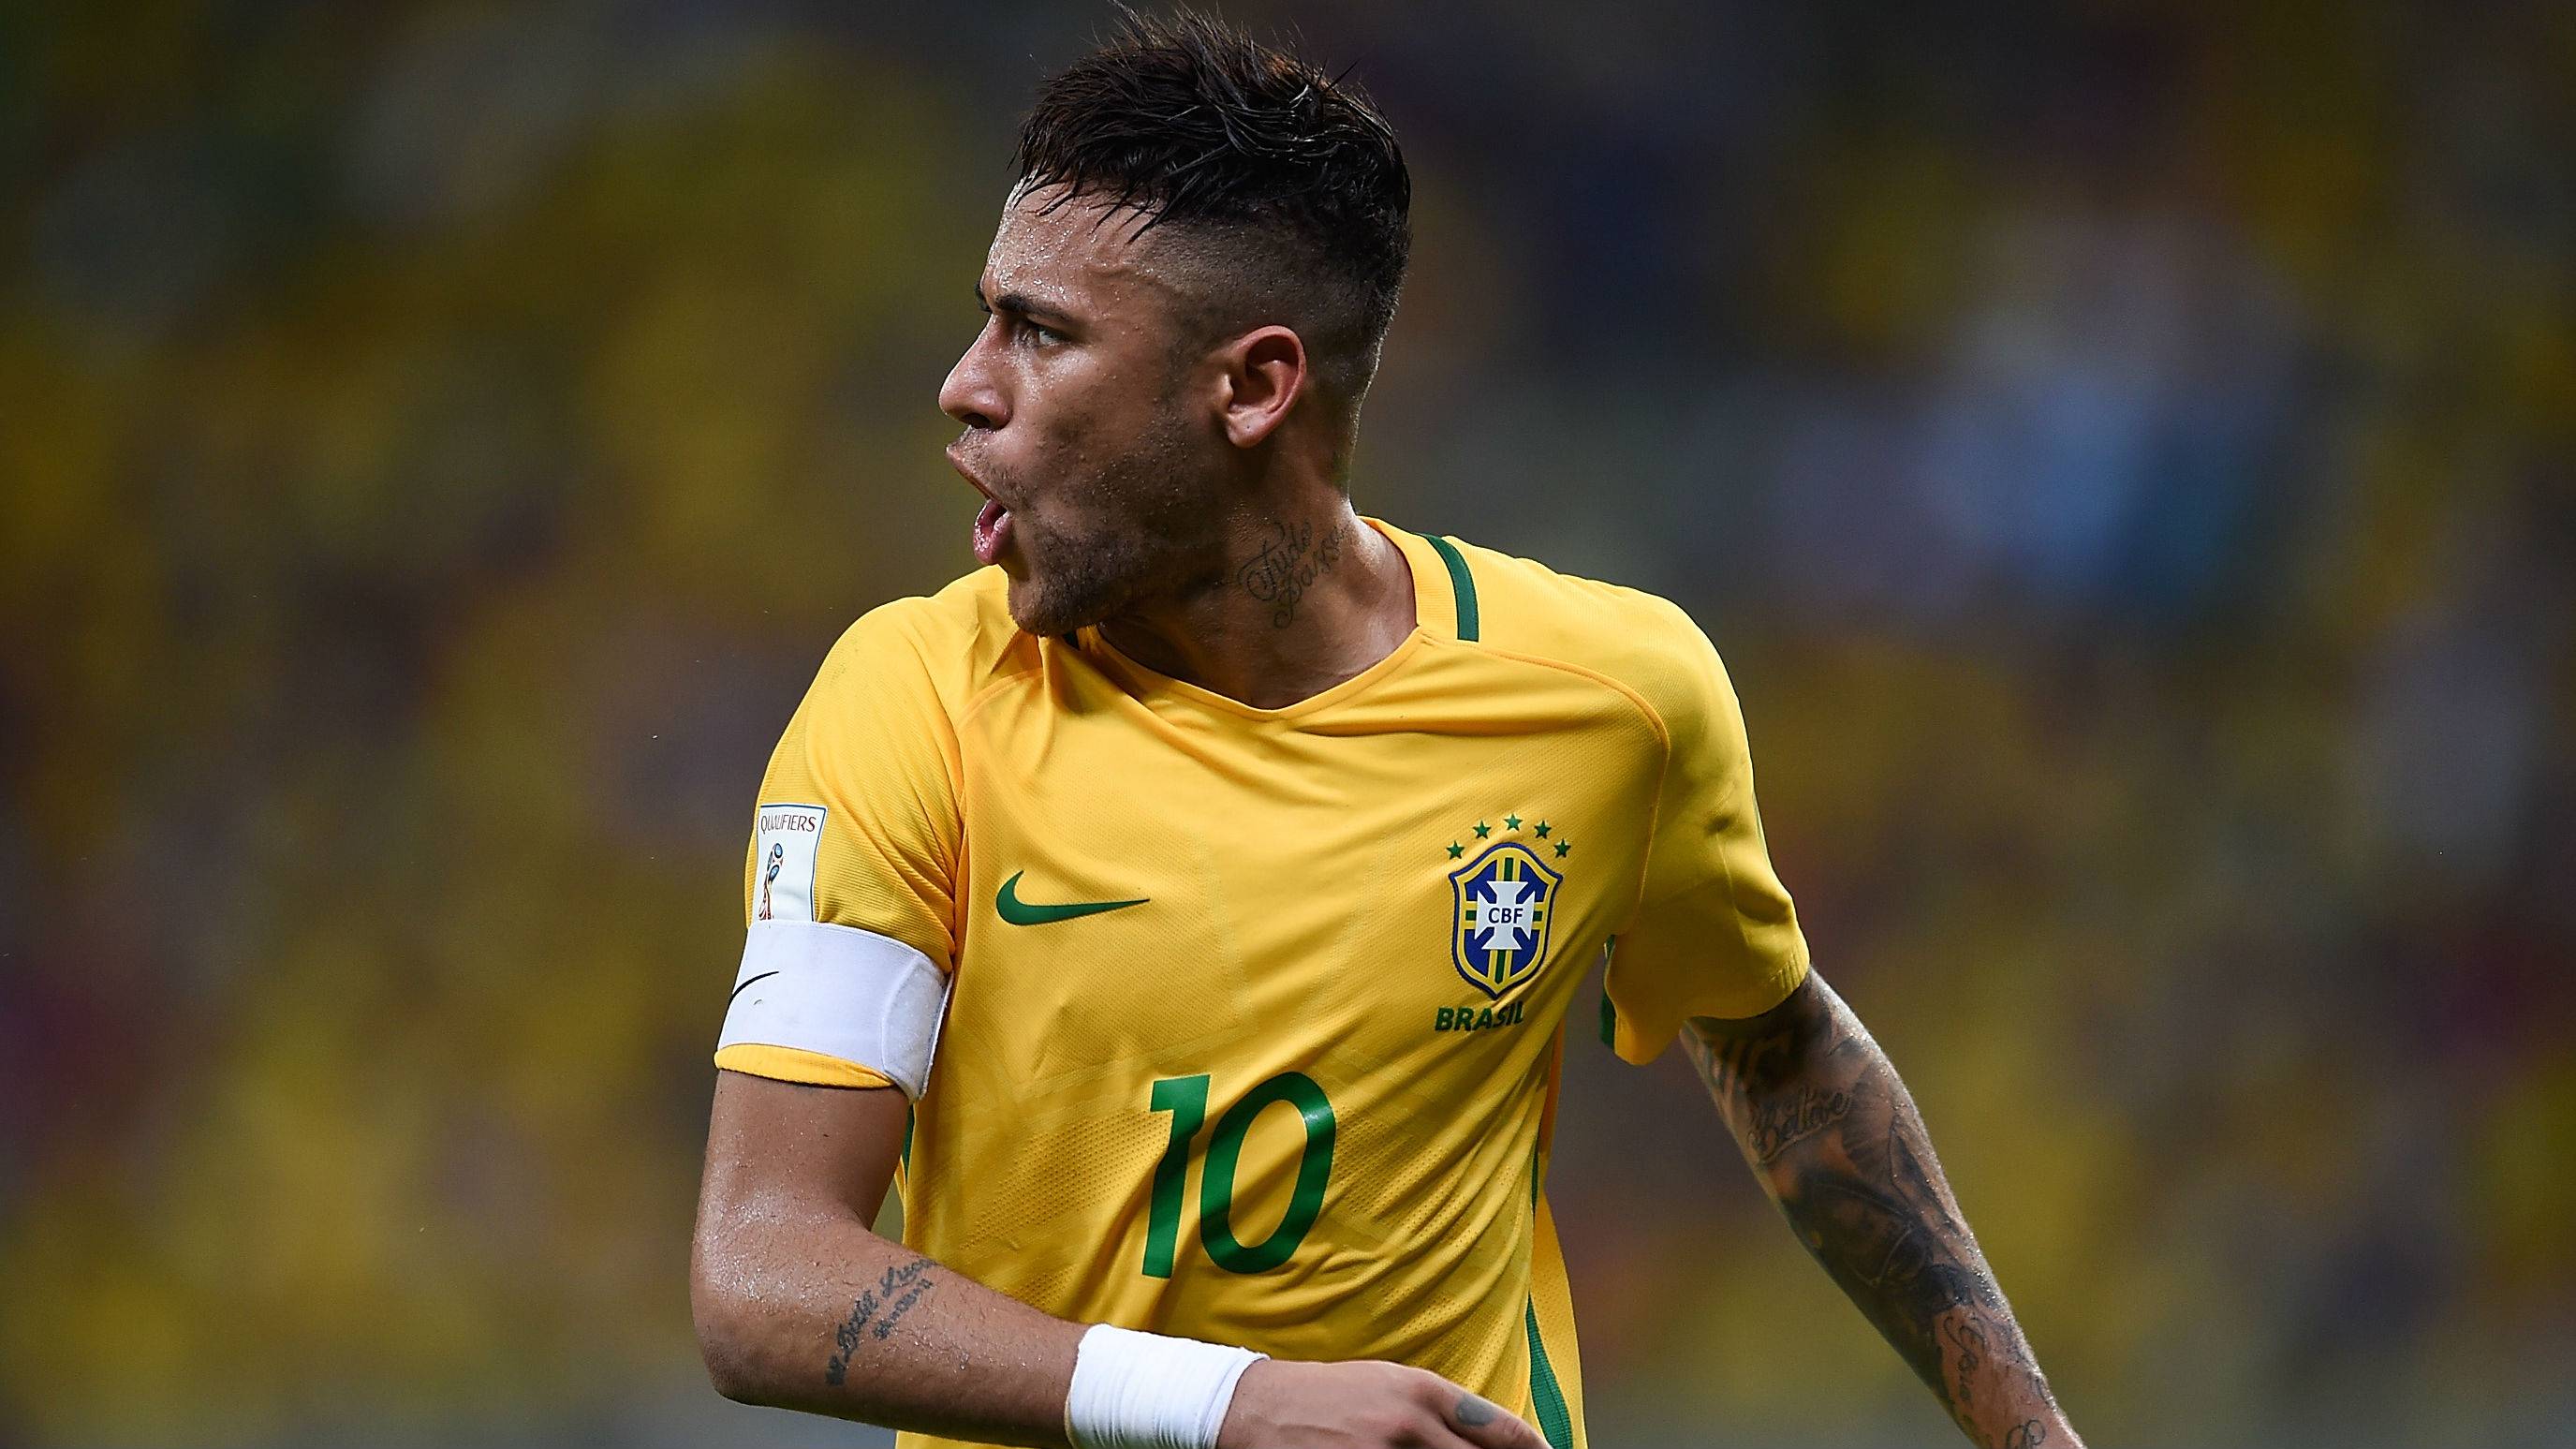 Neymar Jr, angered by an action against Uruguay